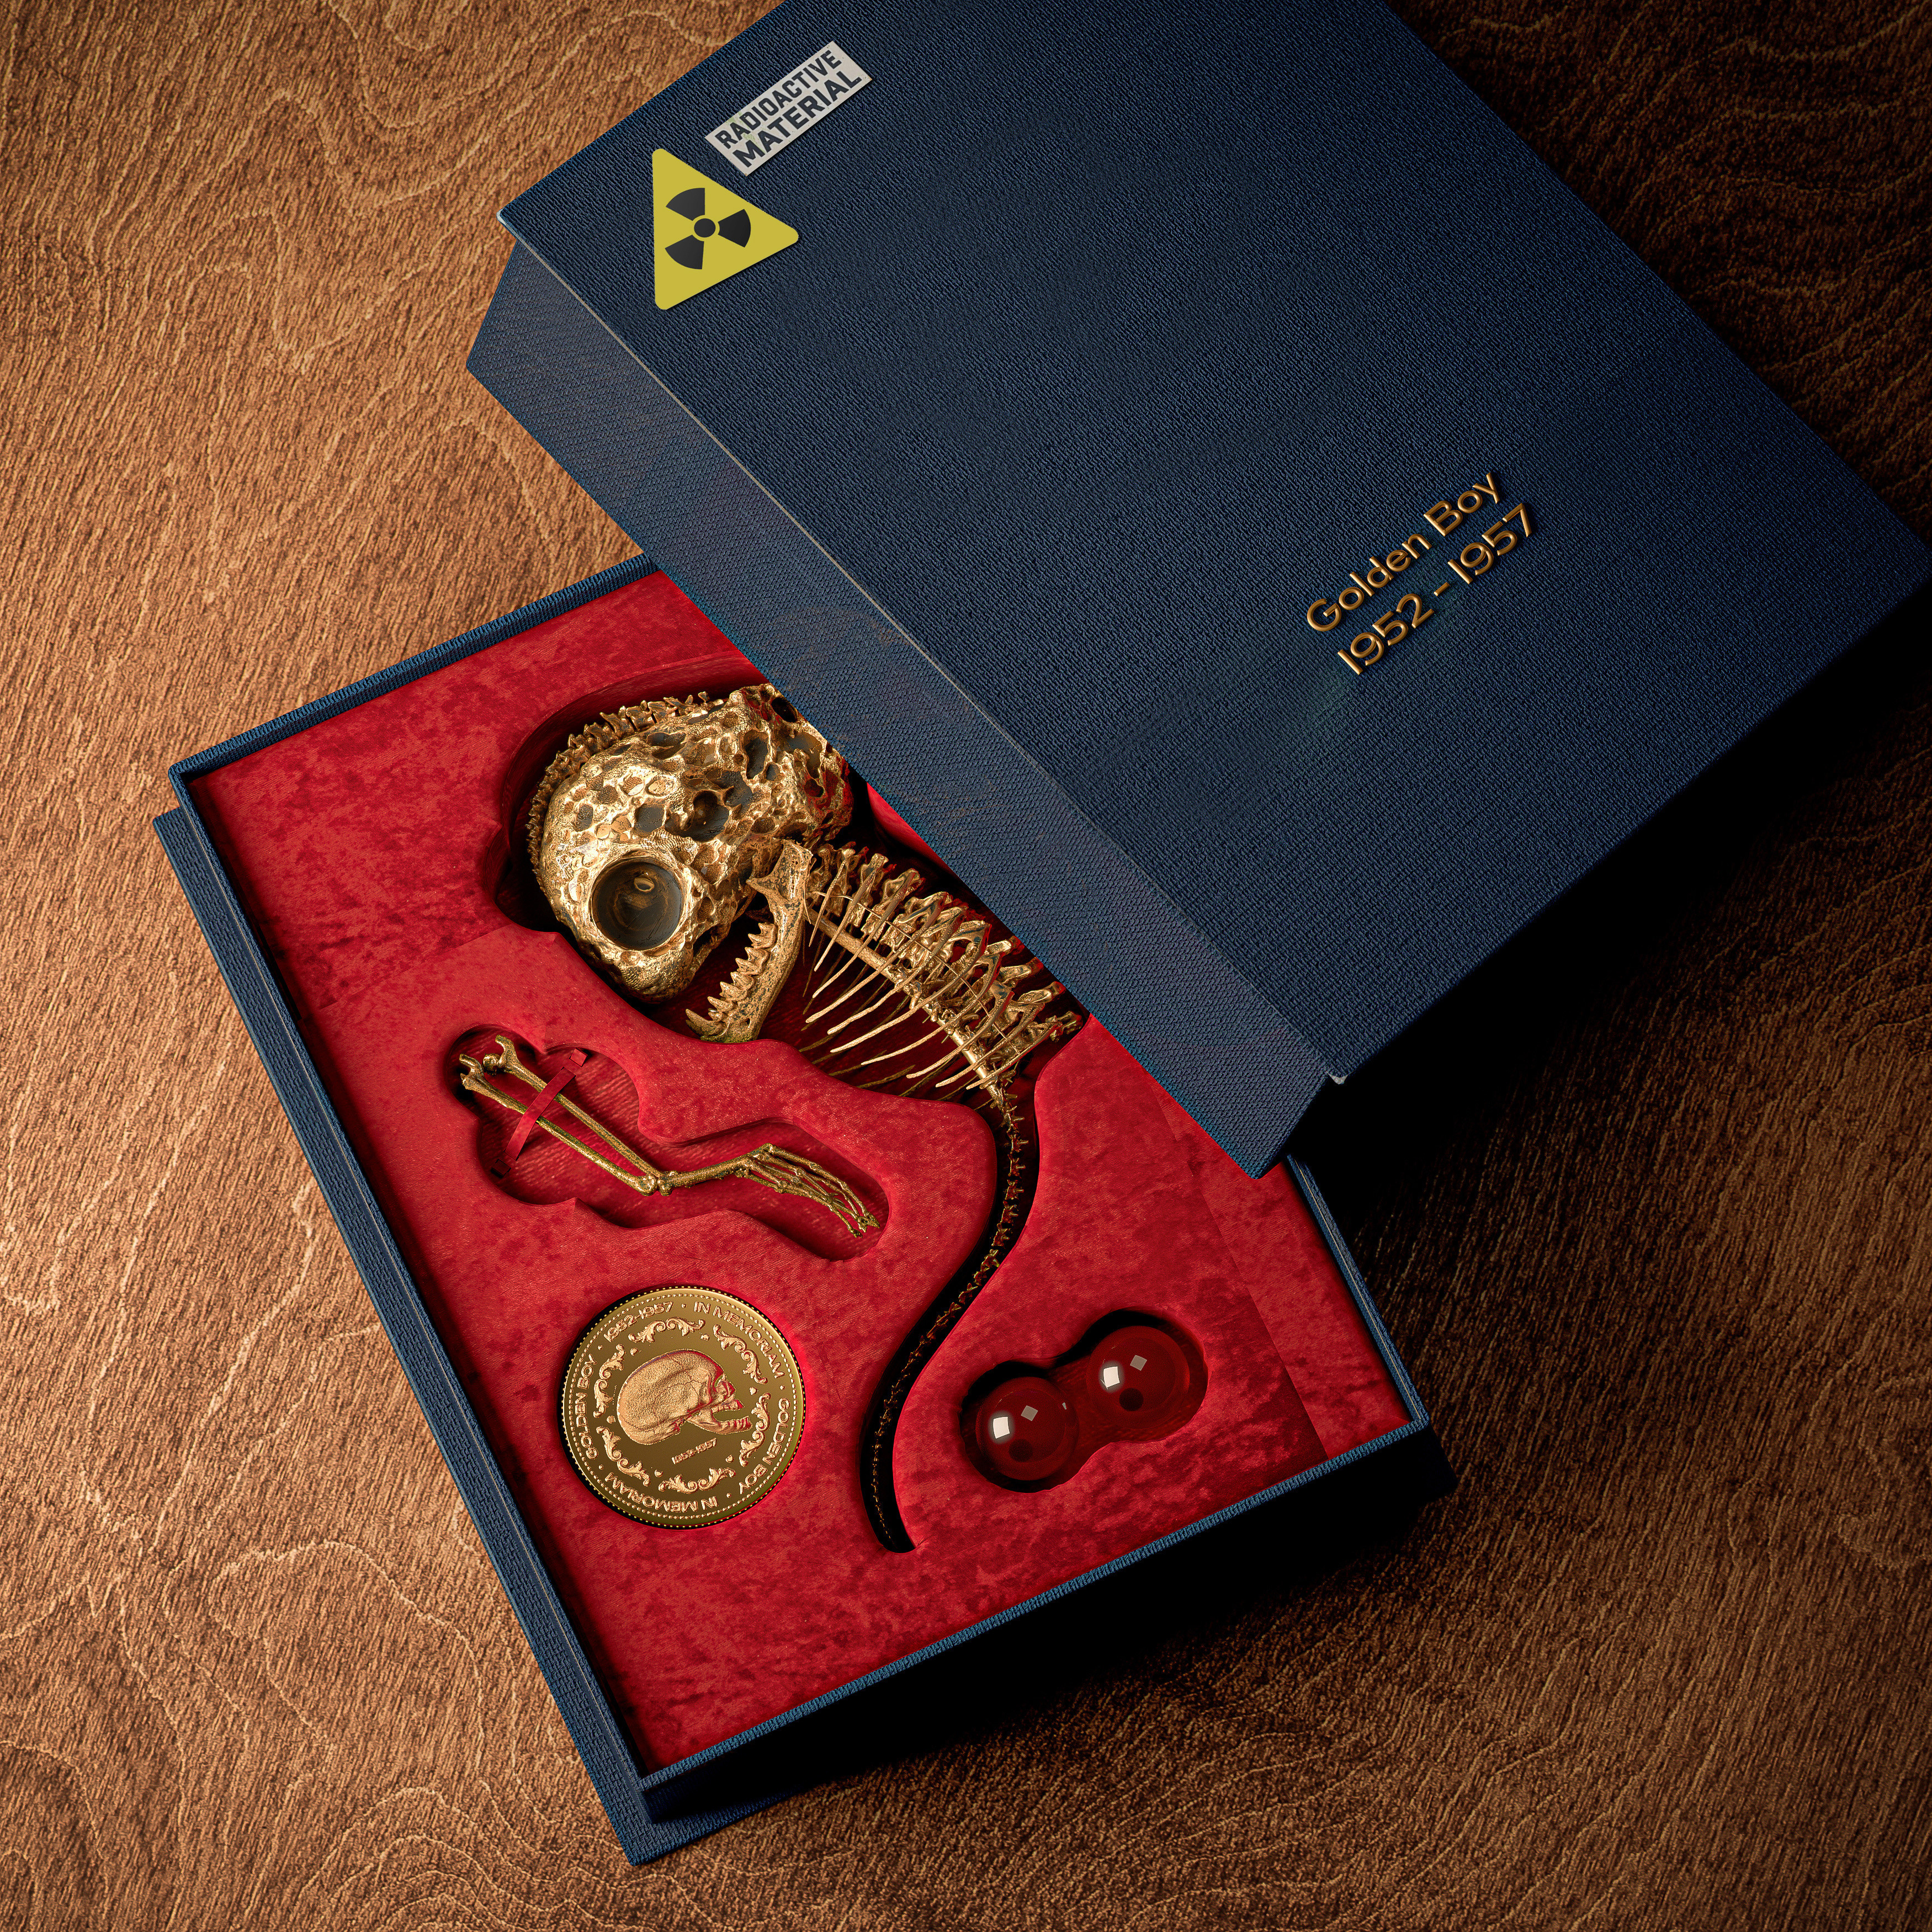 Memorial box with Golden Boy's remains and In-memoriam medallion. 